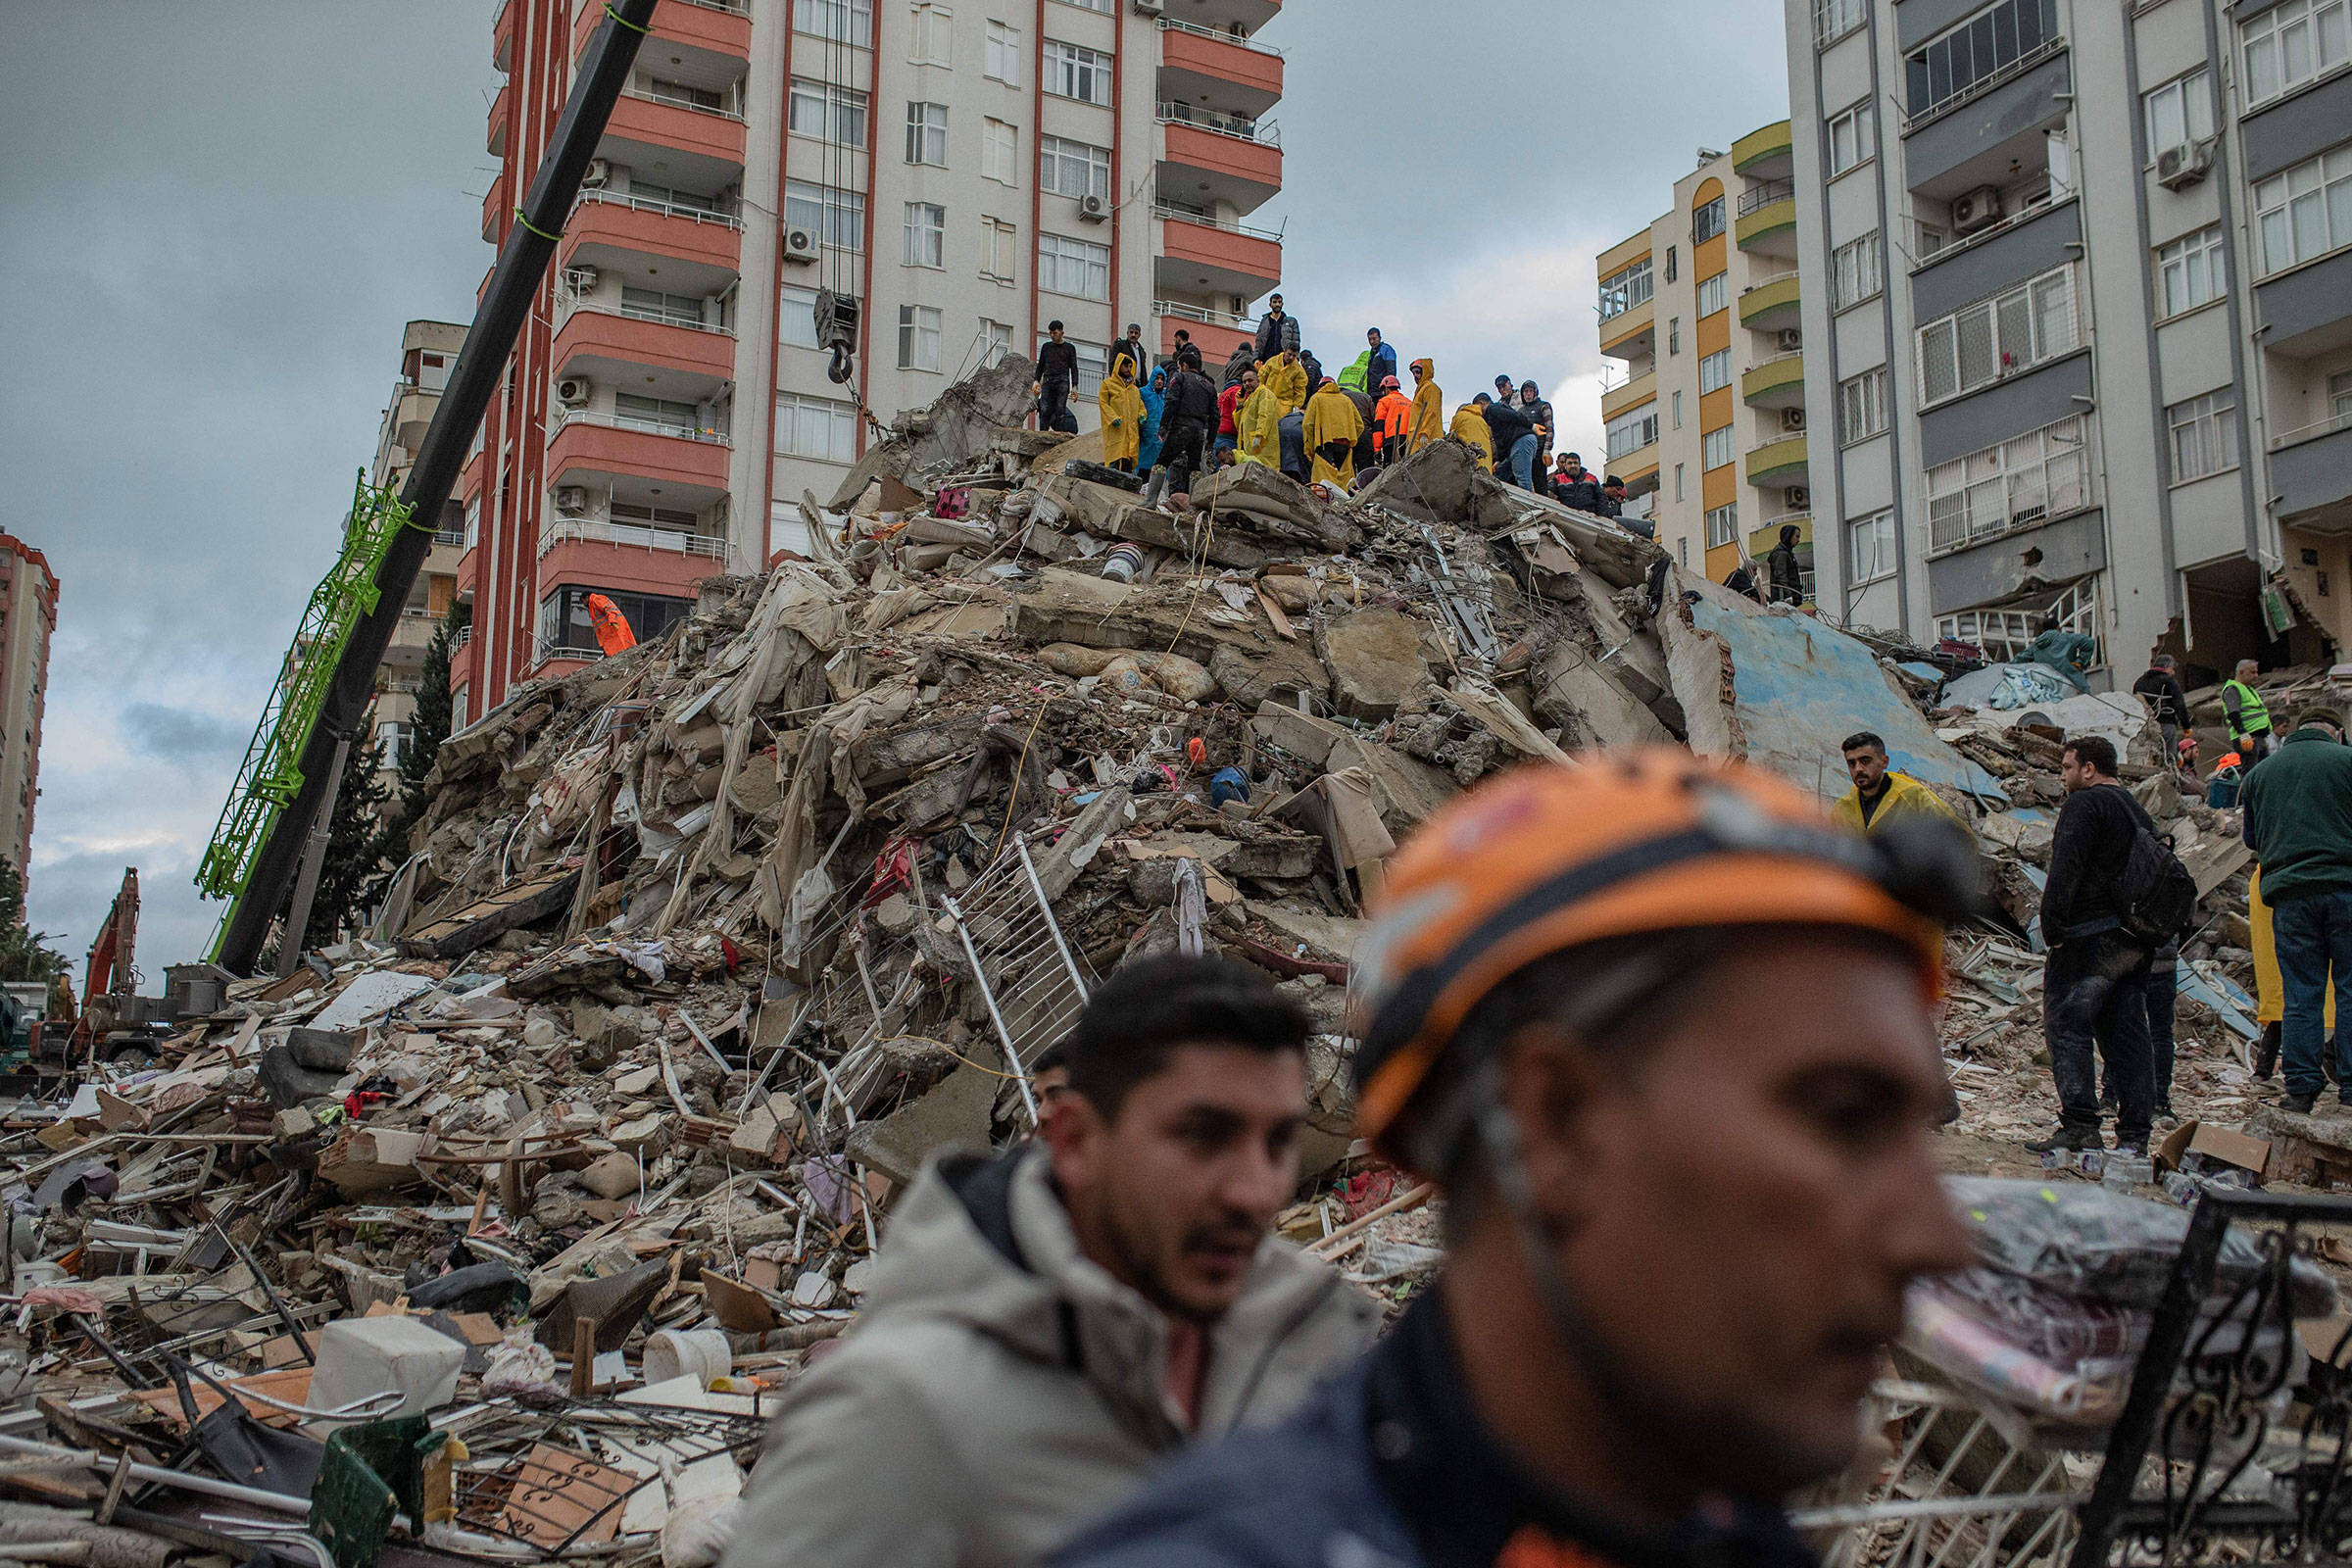 Rescuers search for victims and survivors amidst the rubble of a building that collapsed in Adana, Turkey, on Feb. 6, 2023, after a 7.8-magnitude earthquake struck the country's south-east. (Can Erok—AFP/Getty Images)